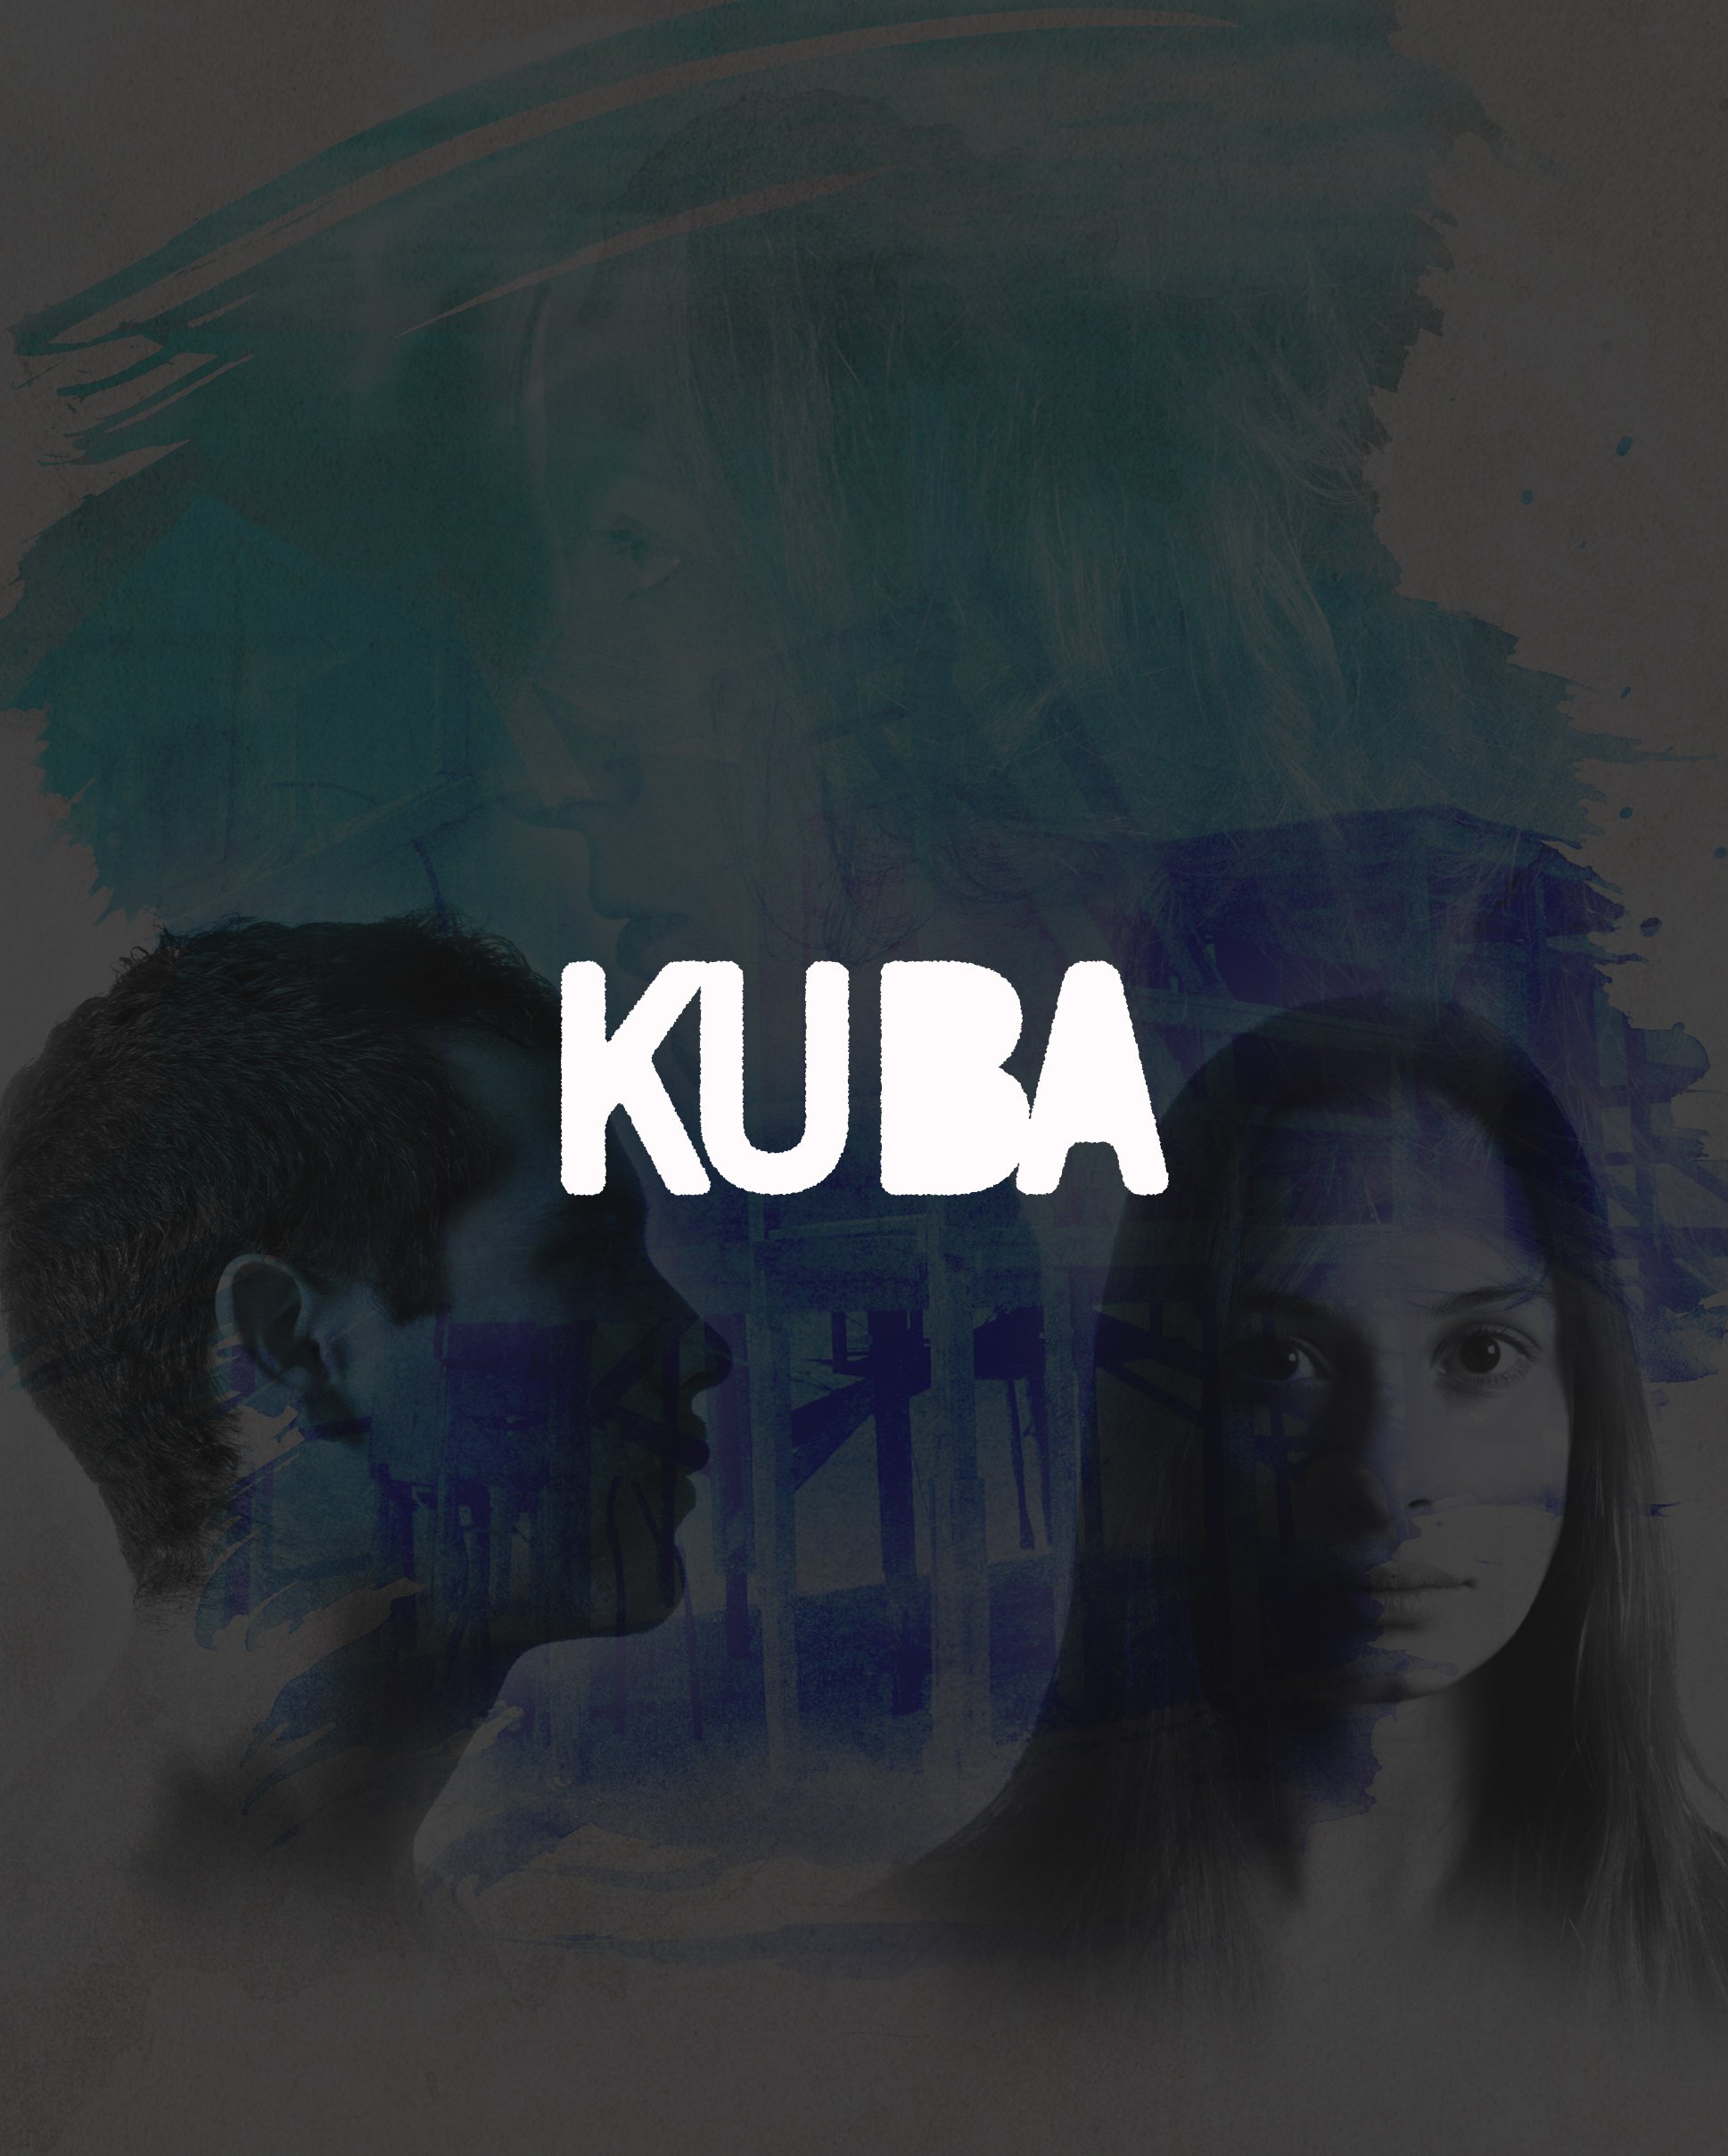 Kuba • Poster design for a theater play.